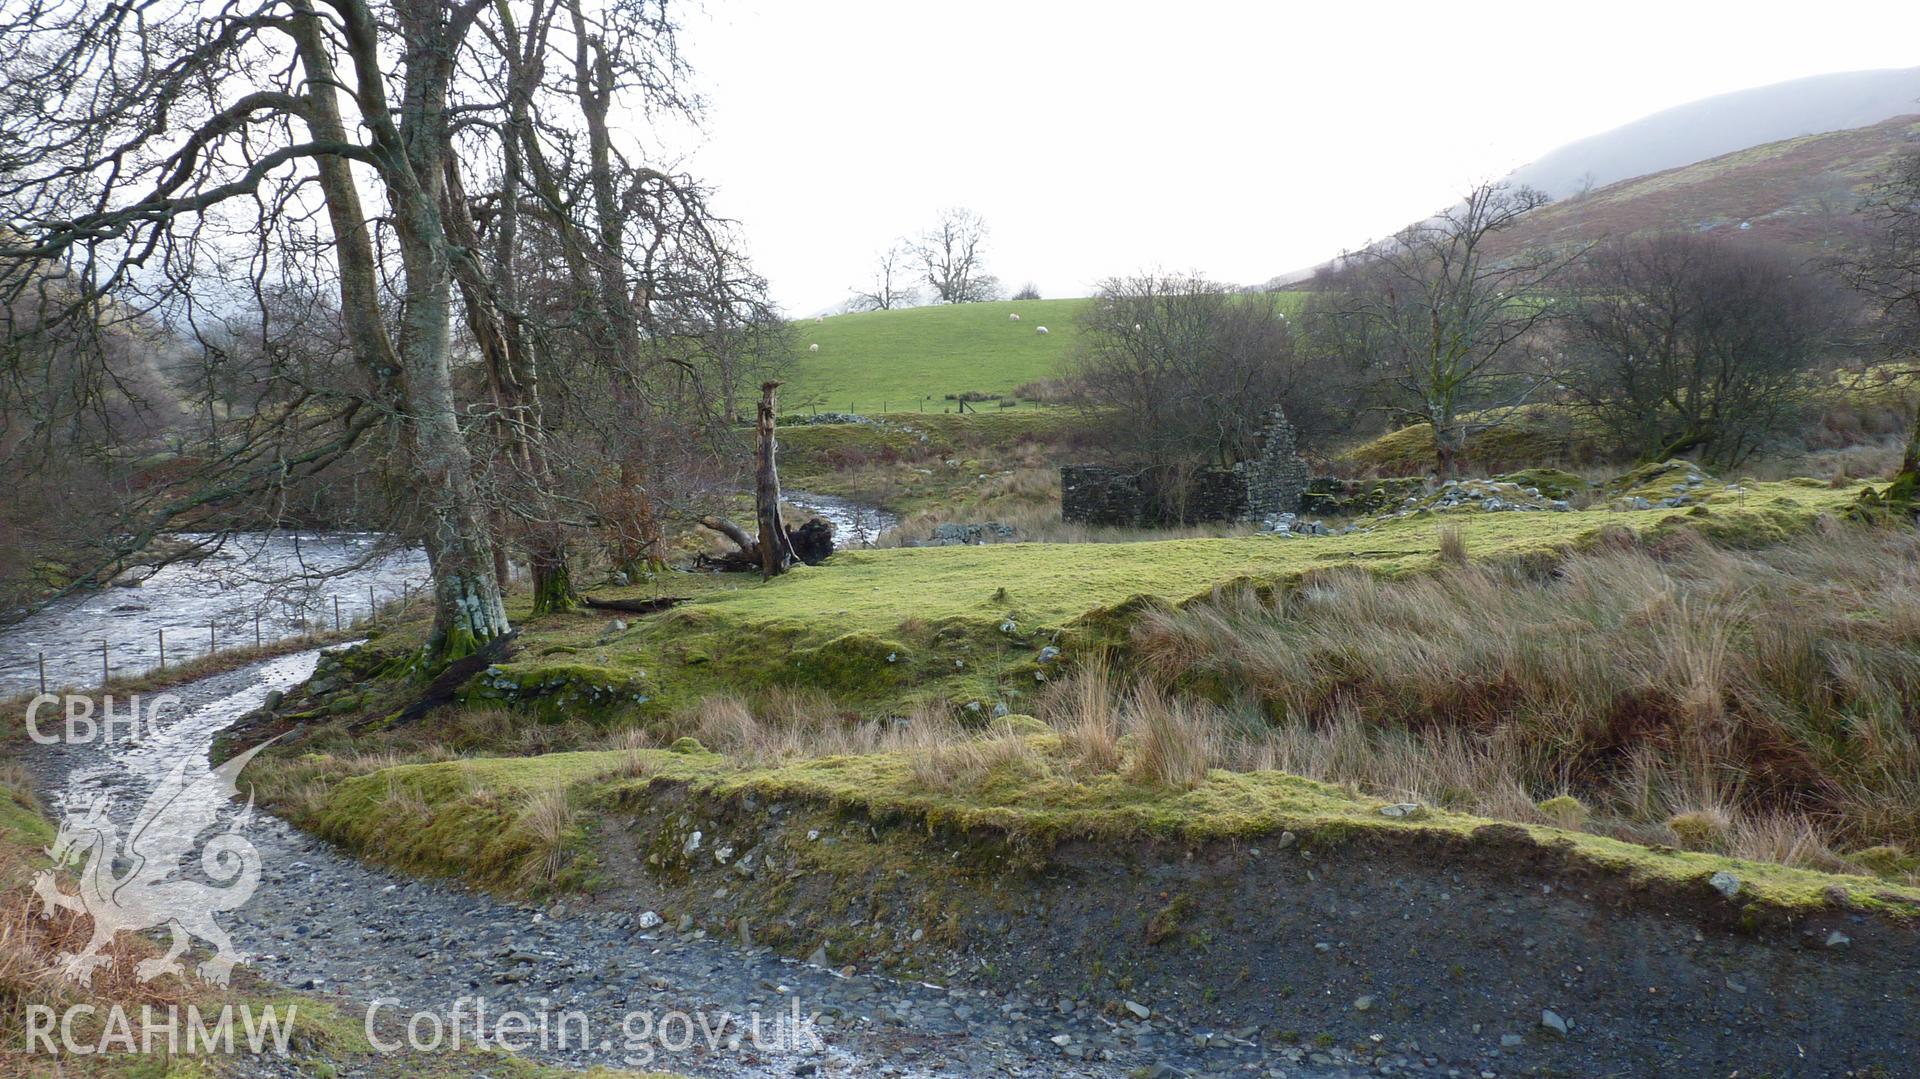 Nant-y-Car farmstead. Looking south east. Photographed for Archaeological Desk Based Assessment of Afon Claerwen, Elan Valley, Rhayader. Assessment conducted by Archaeology Wales in 2017-18. Project no. 2573.